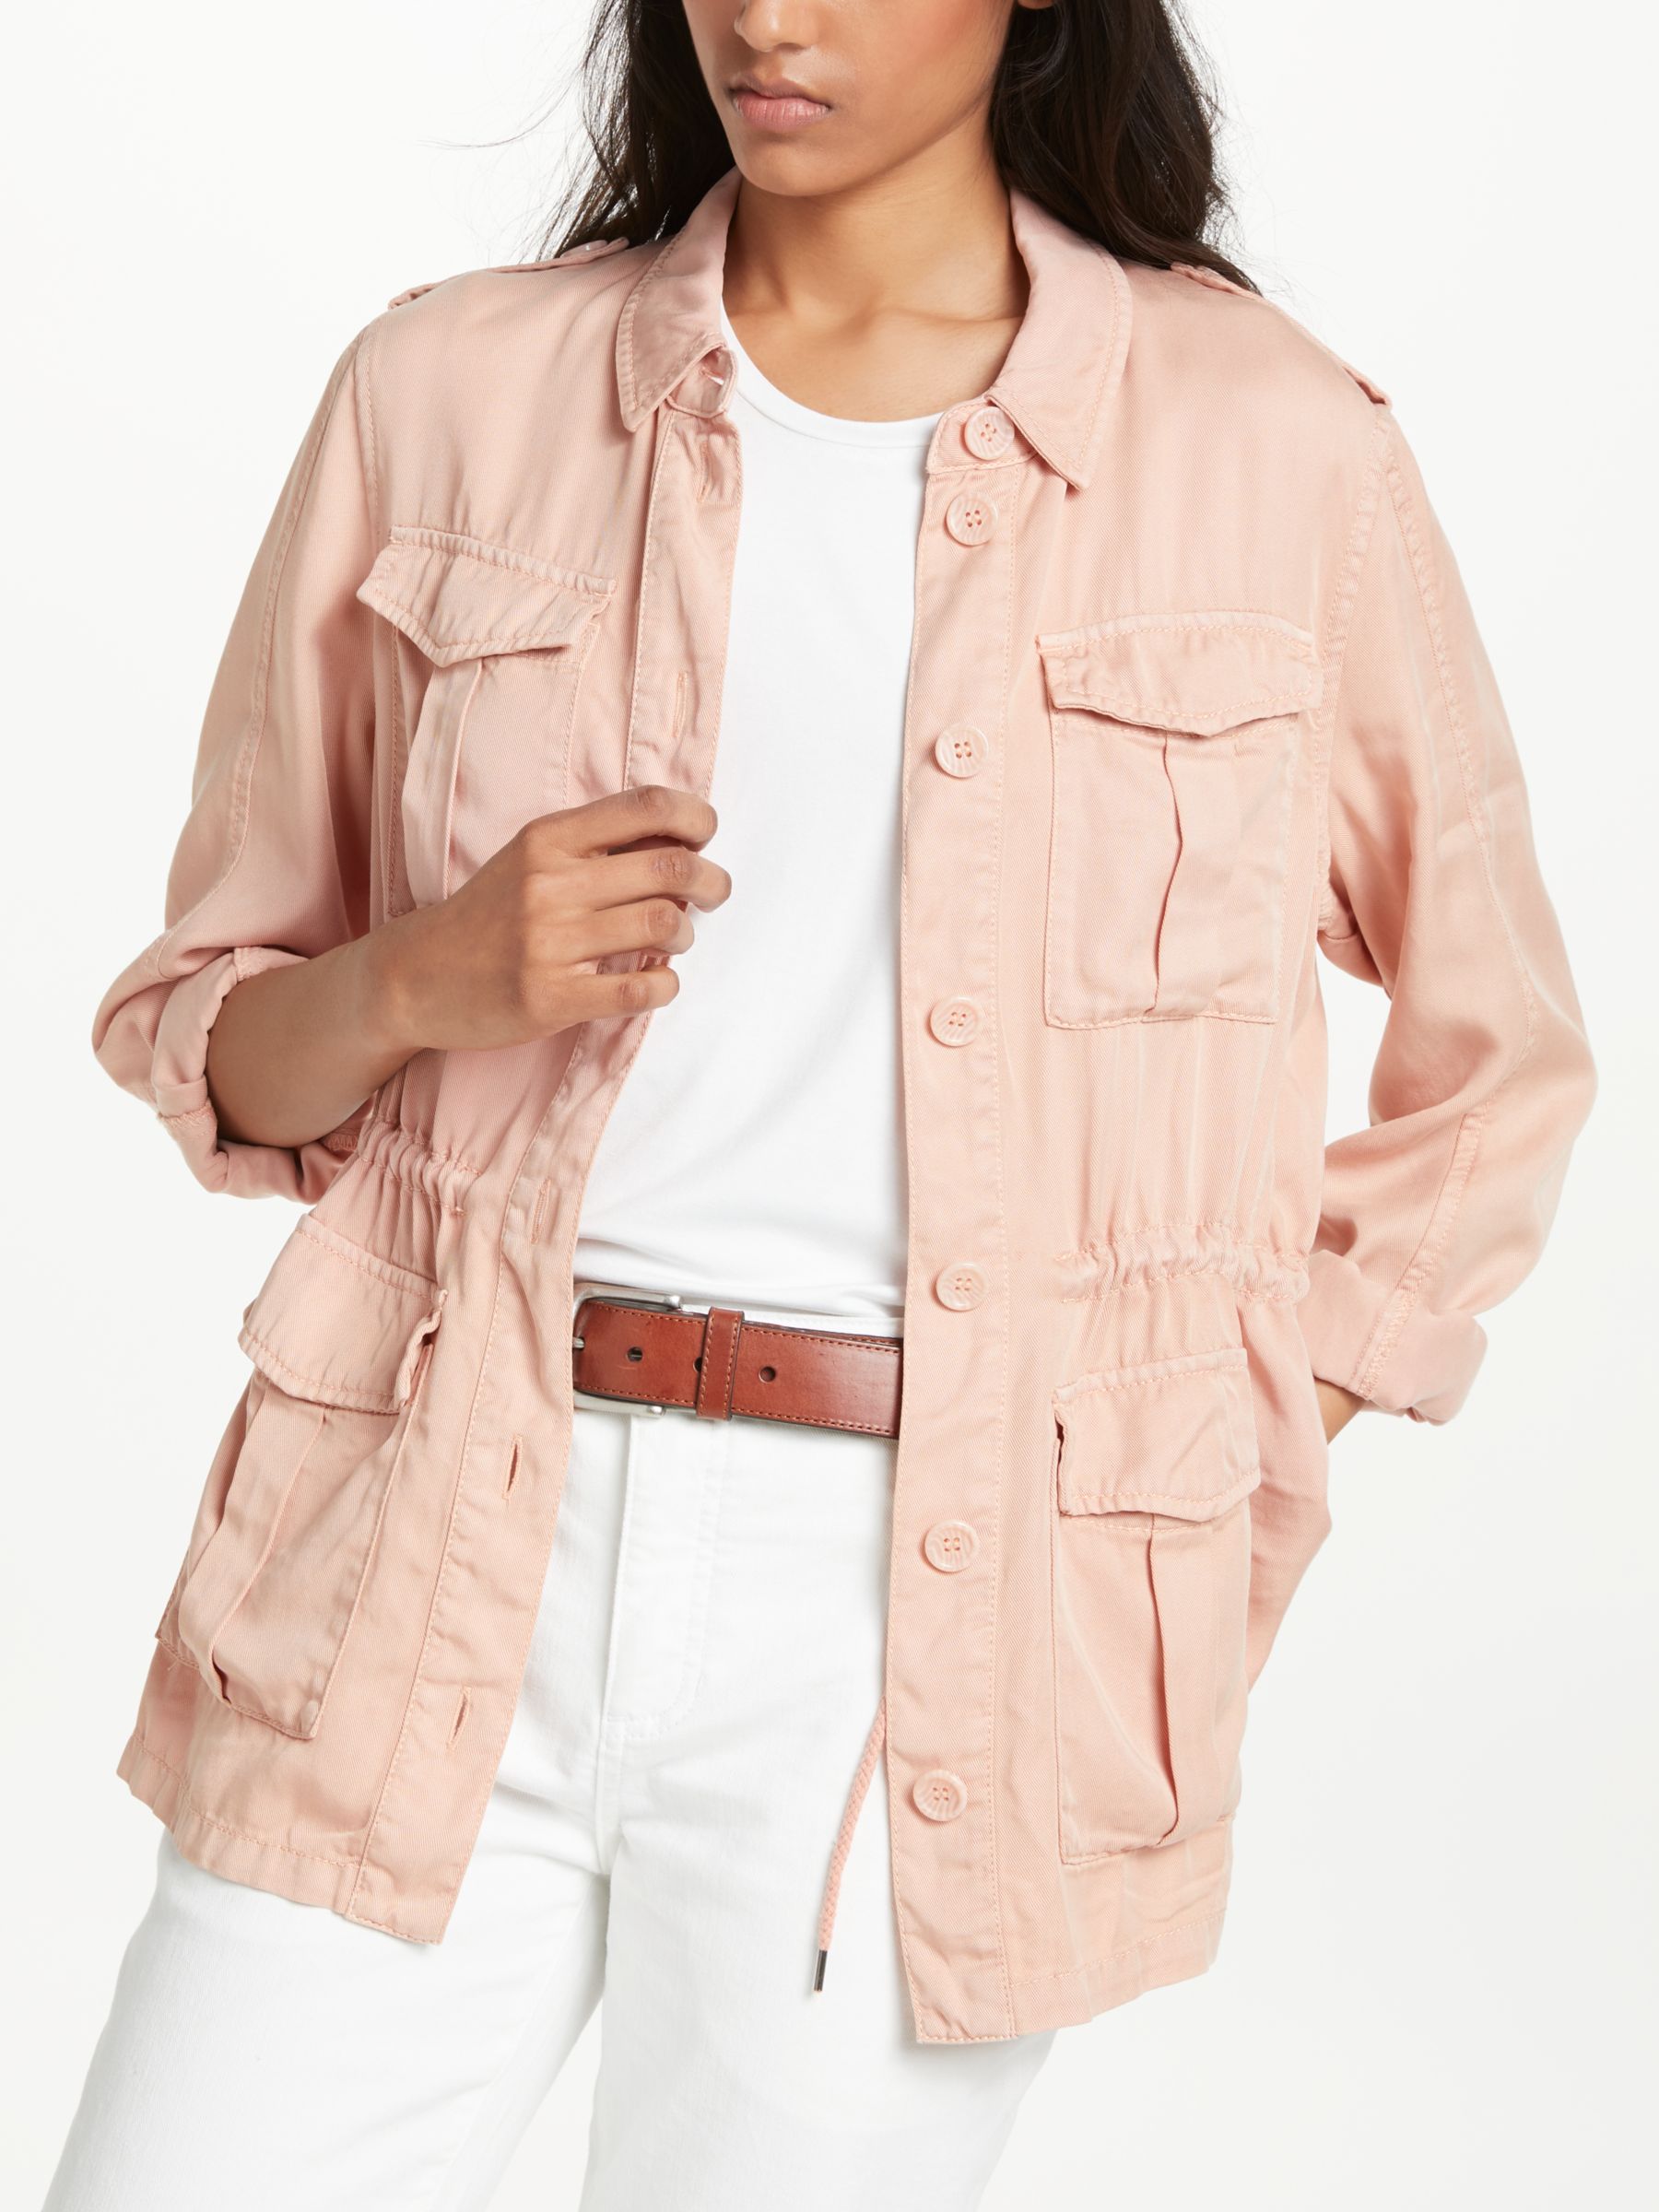 AND/OR Utility Jacket, Desert Rose, 10